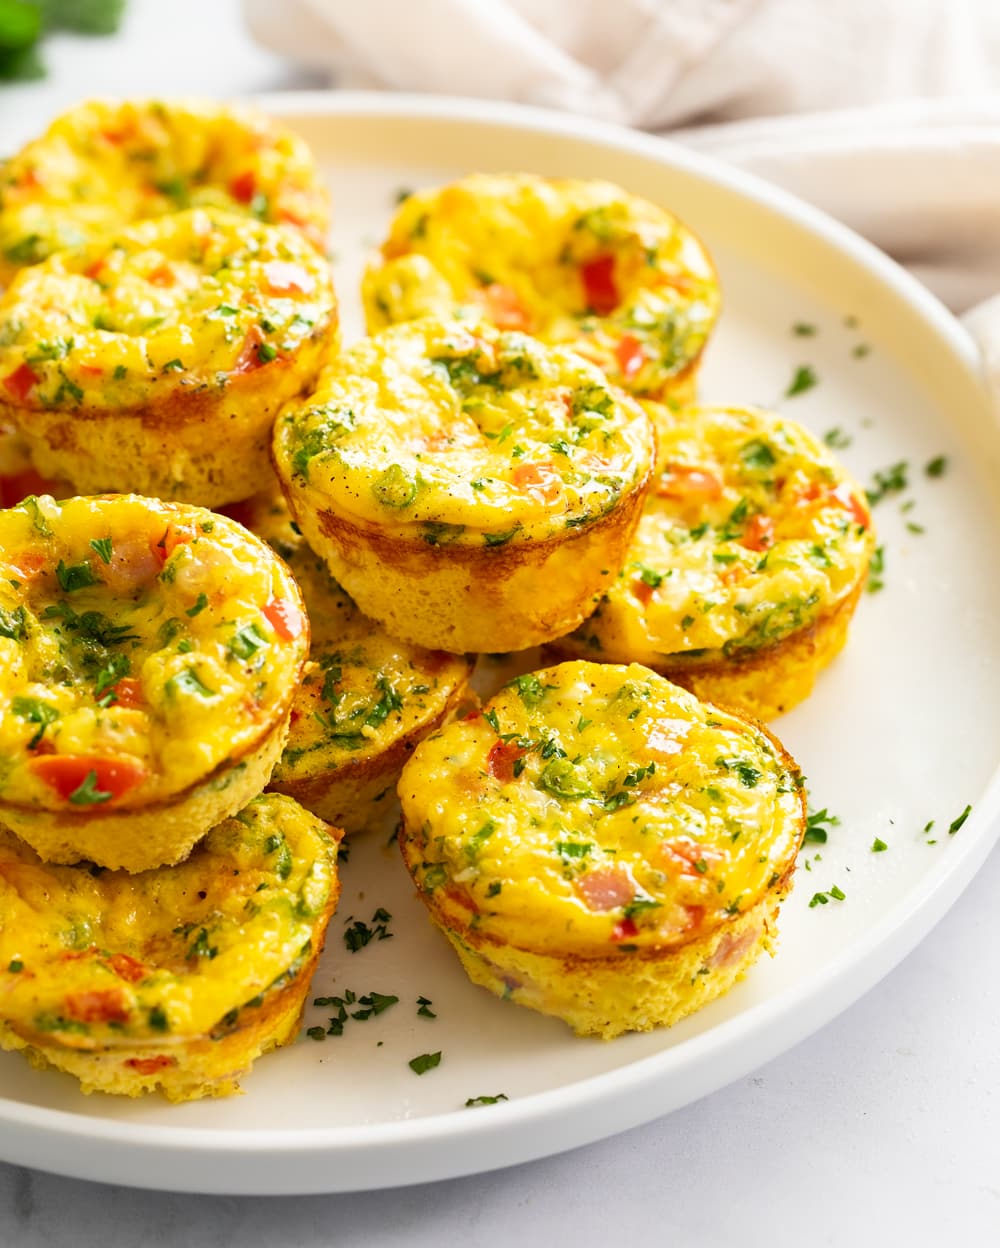 Egg muffins stacked on top of each other on a white plate with chopped parsley.